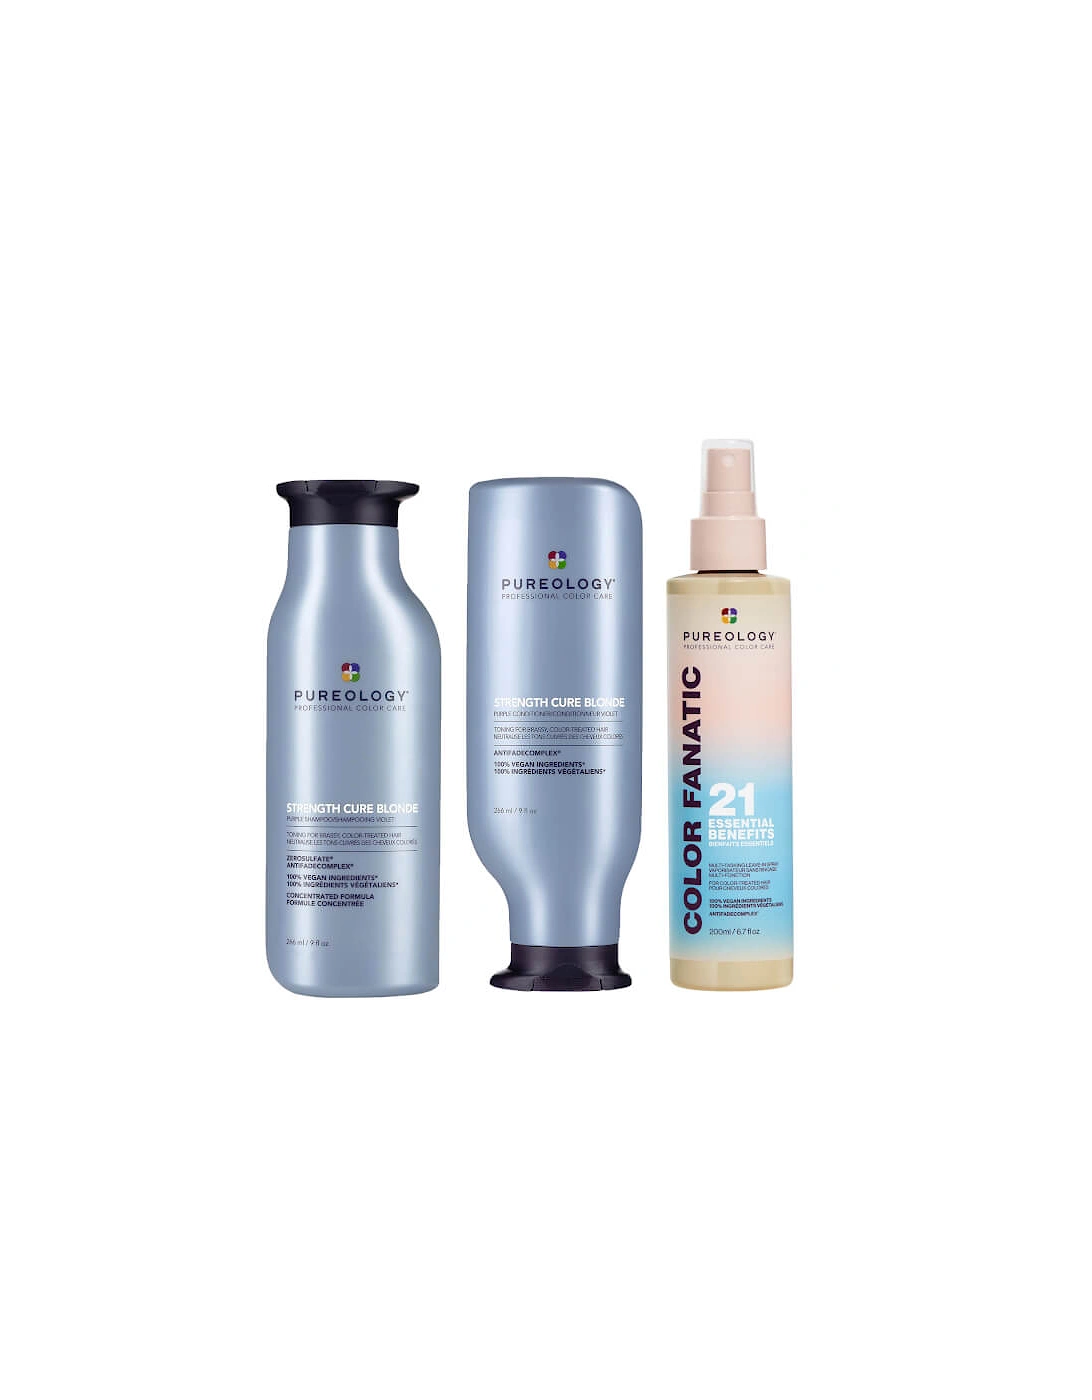 Strength Cure Blonde Purple Shampoo, Conditioner and Color Fanatic Spray Routine for Toning Brassy Hair, 2 of 1